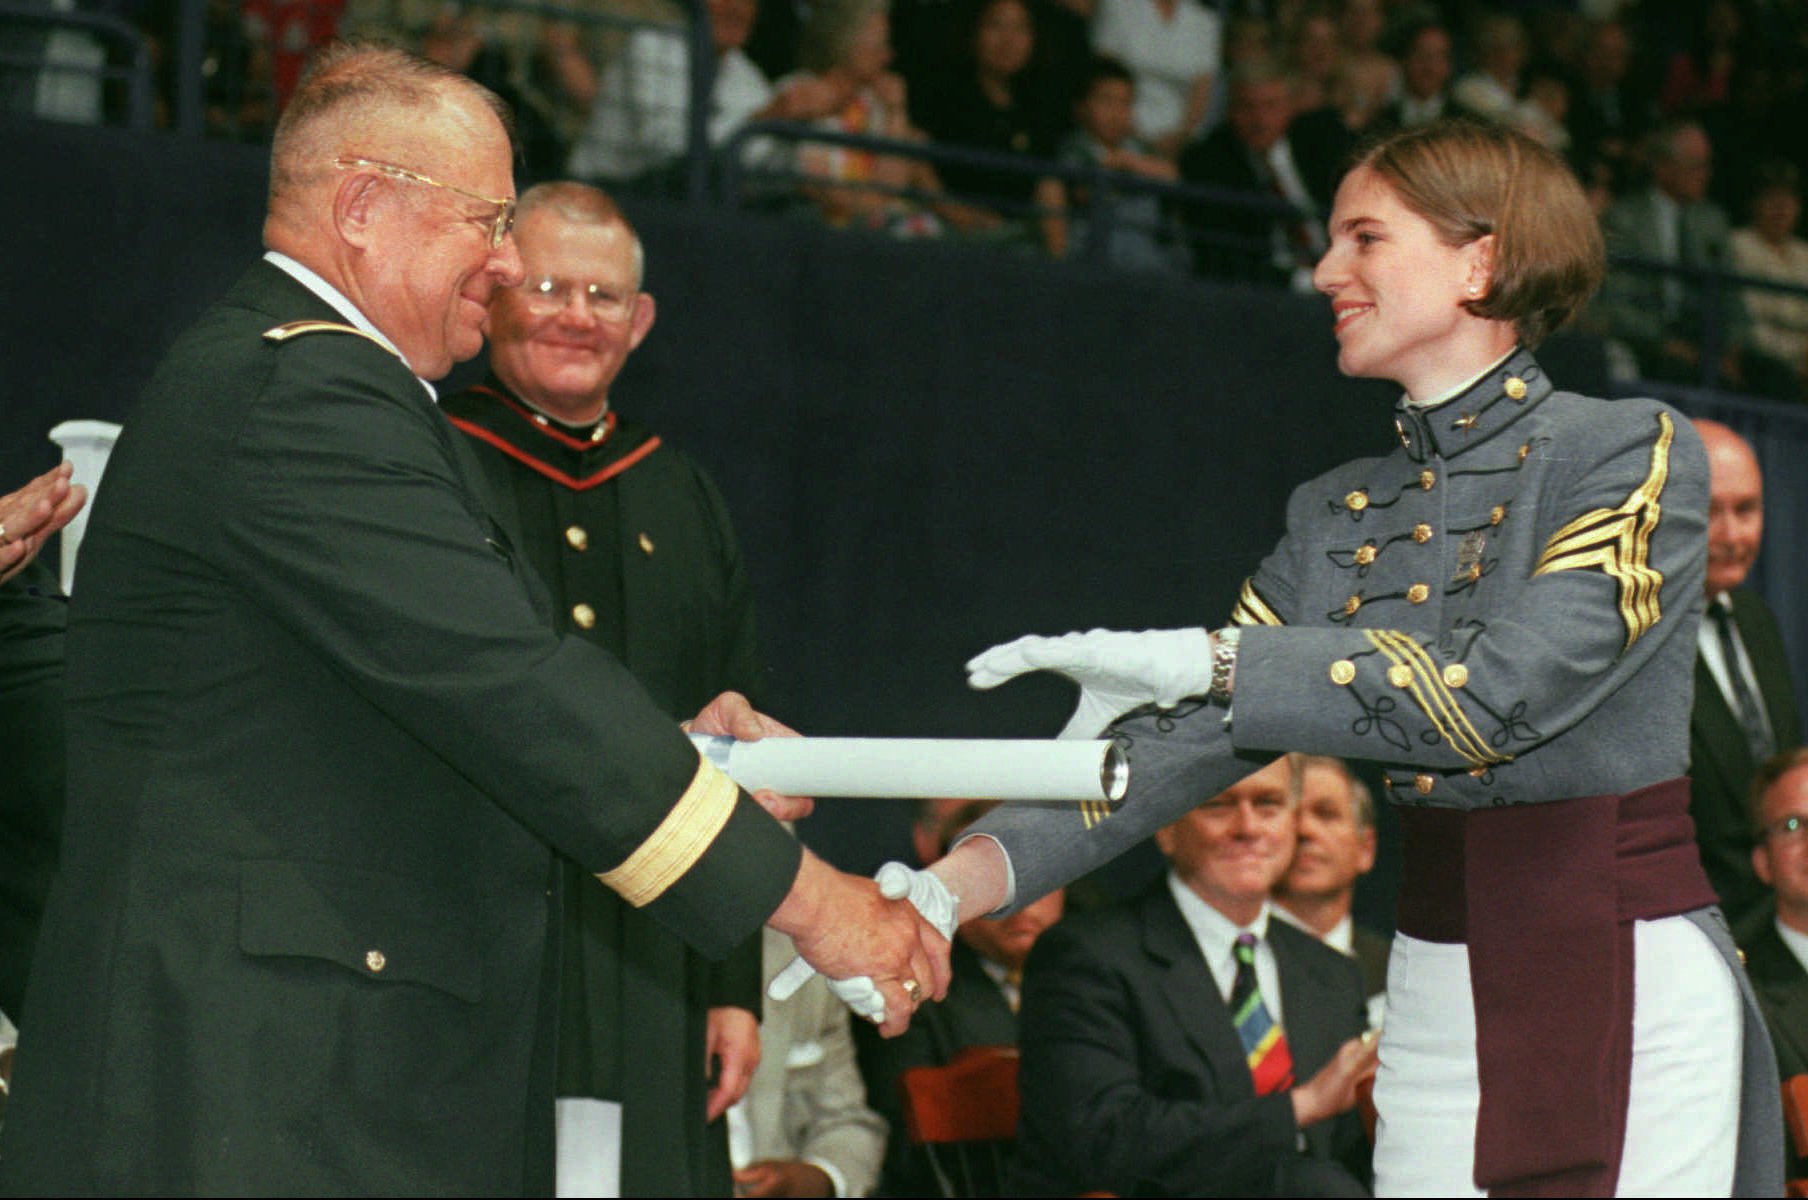 Nancy Ruth Mace, right, receives her Citadel diploma from her father Brig. Gen. James Emory Mace, the commandant of cadets and a Citadel alumnus, during The Citadel commencement Saturday, May 8, 1999.  Mace is the first female to graduate from The Citadel.  (AP Photo/Mic Smith)